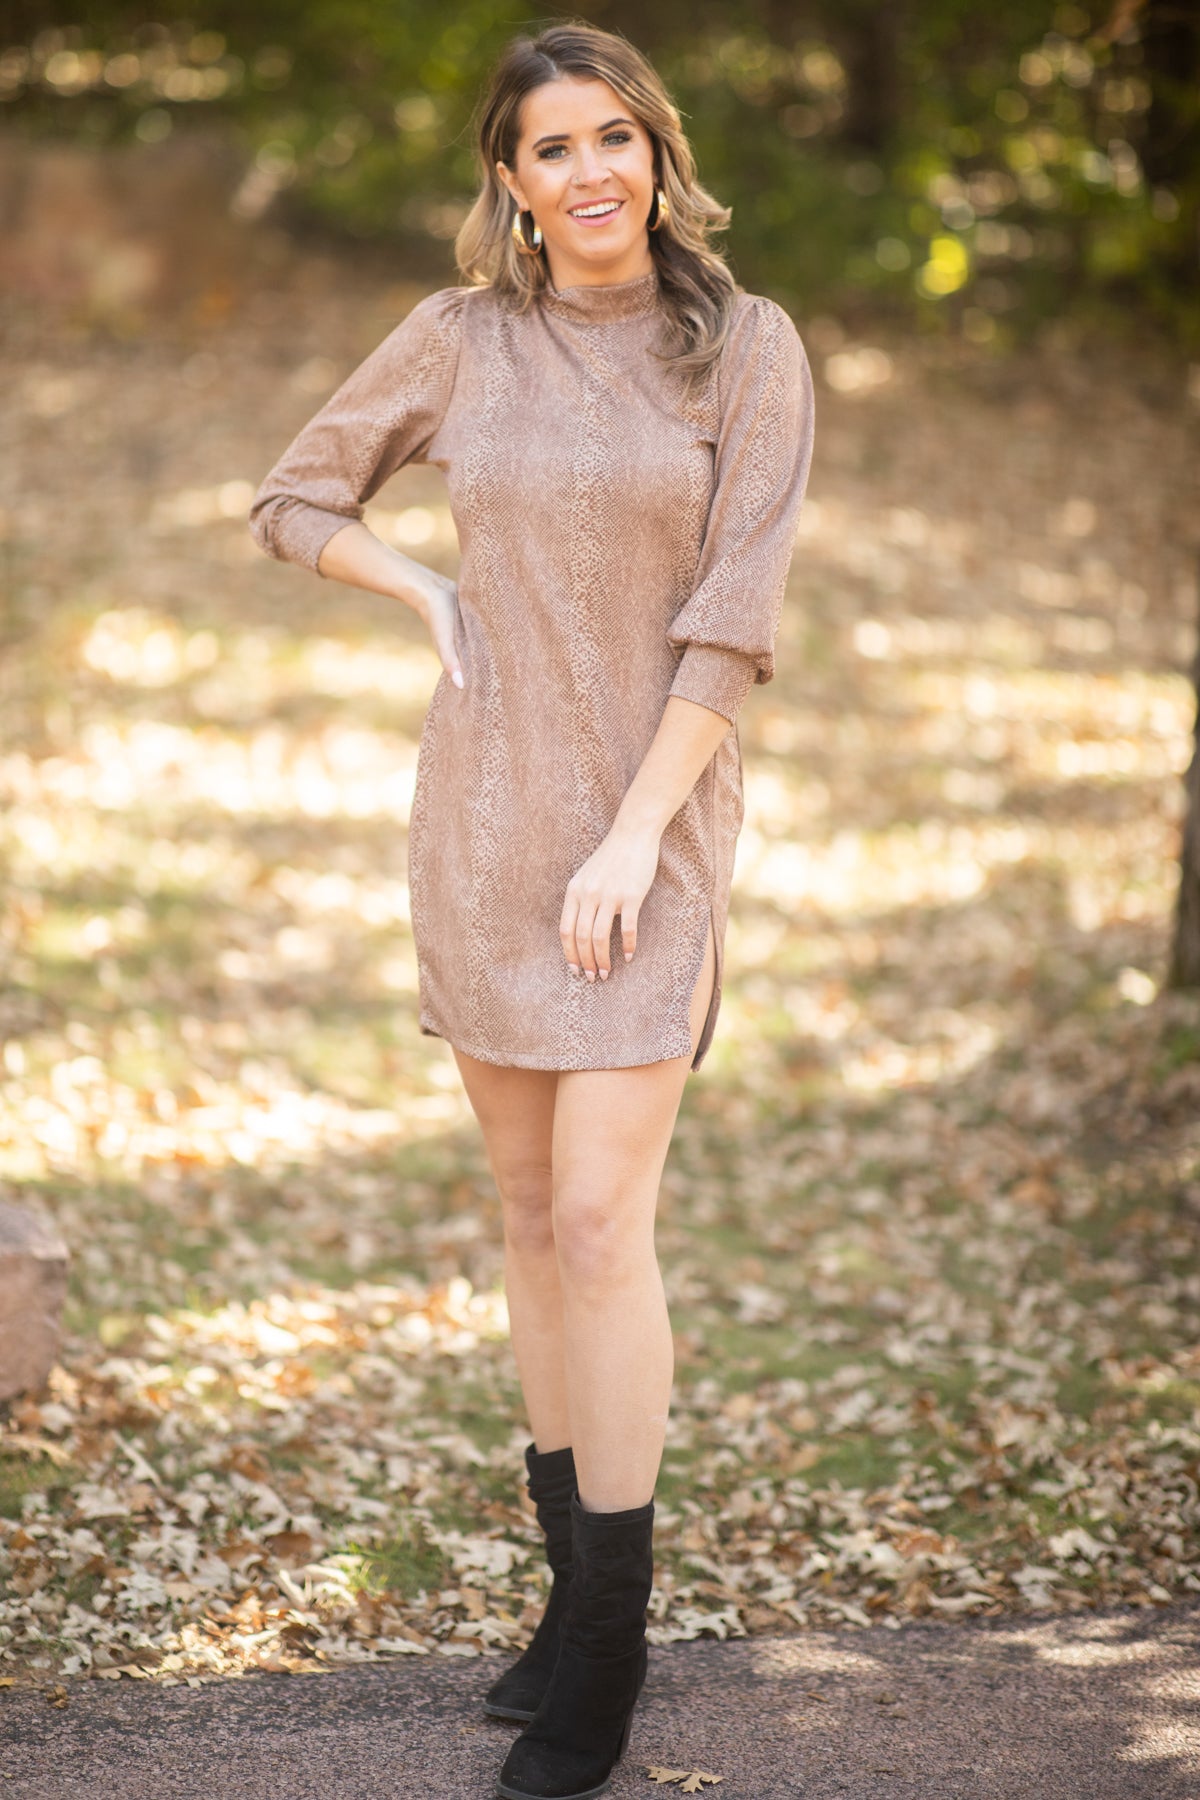 Brown Animal Print Dress With Side Slit - Filly Flair